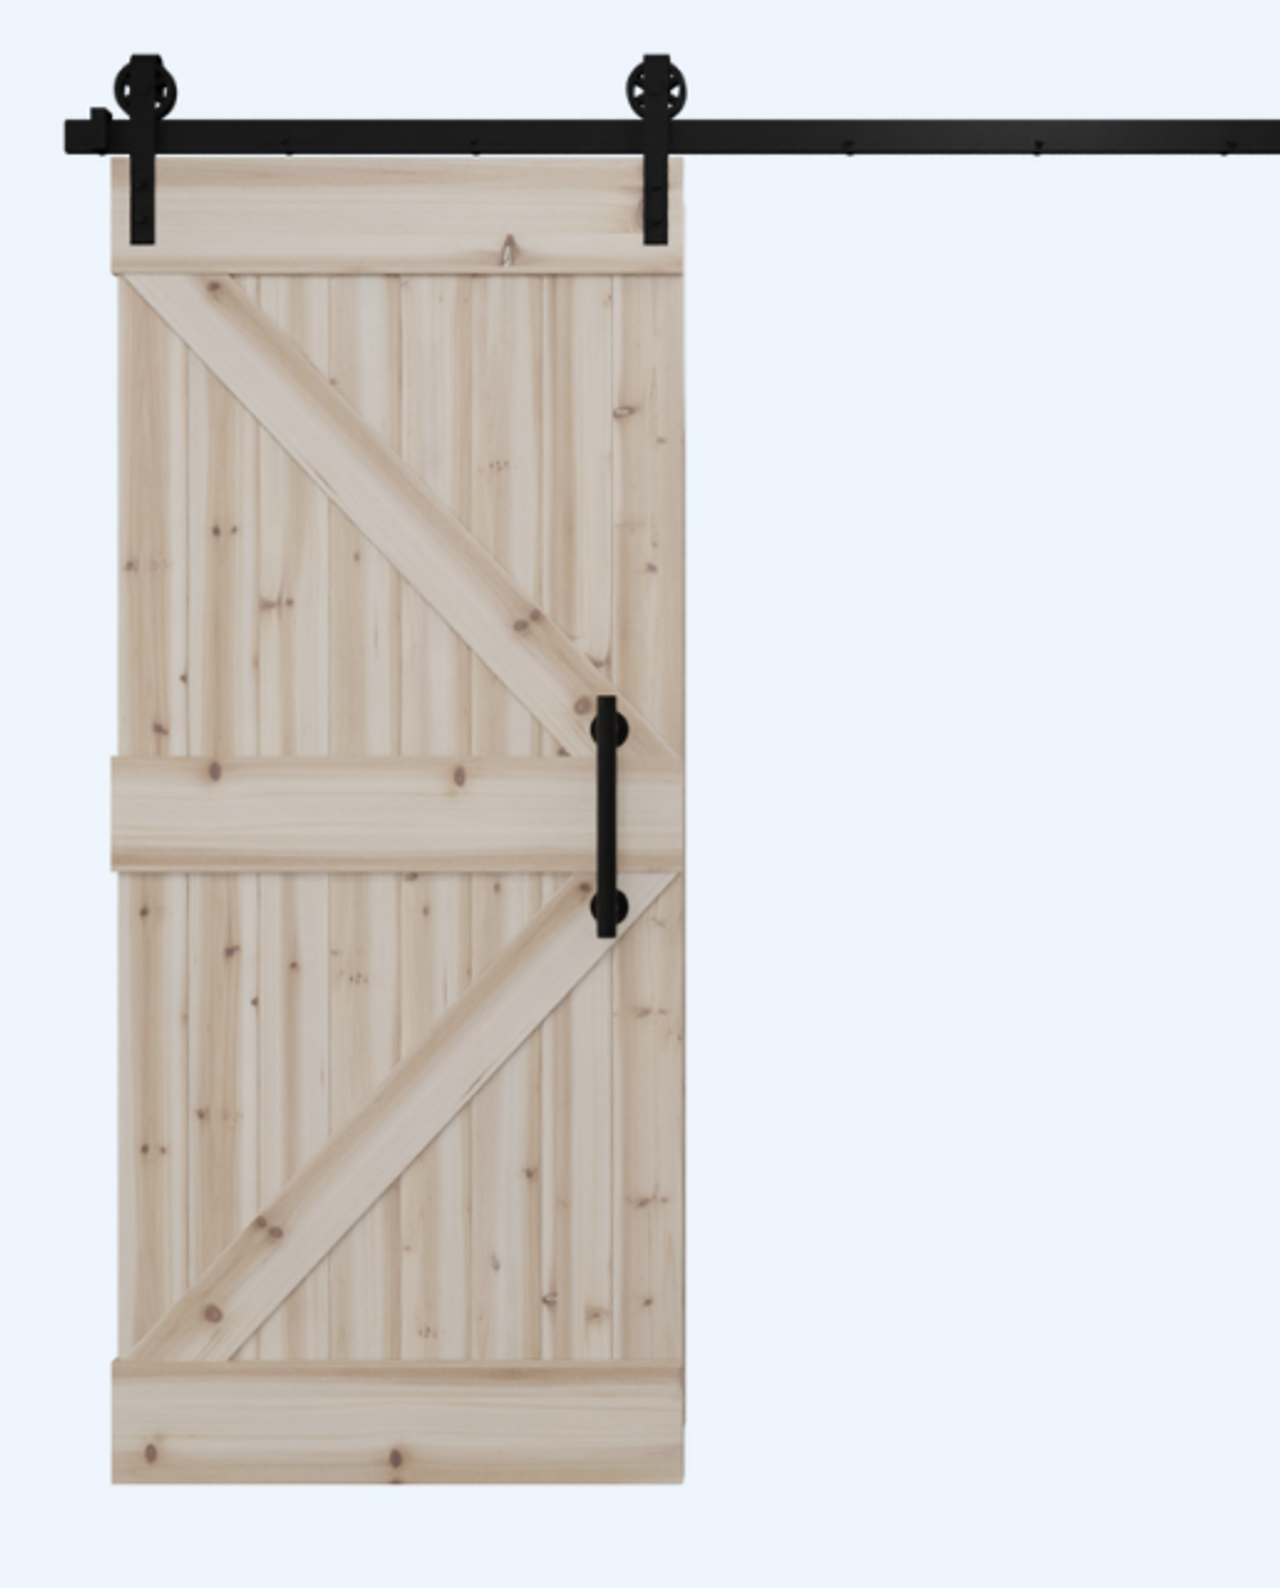 https://cdn11.bigcommerce.com/s-zxo13b612i/images/stencil/1280w/image-manager/in-stock-diy-barn-door-feature.png?t=1656083820